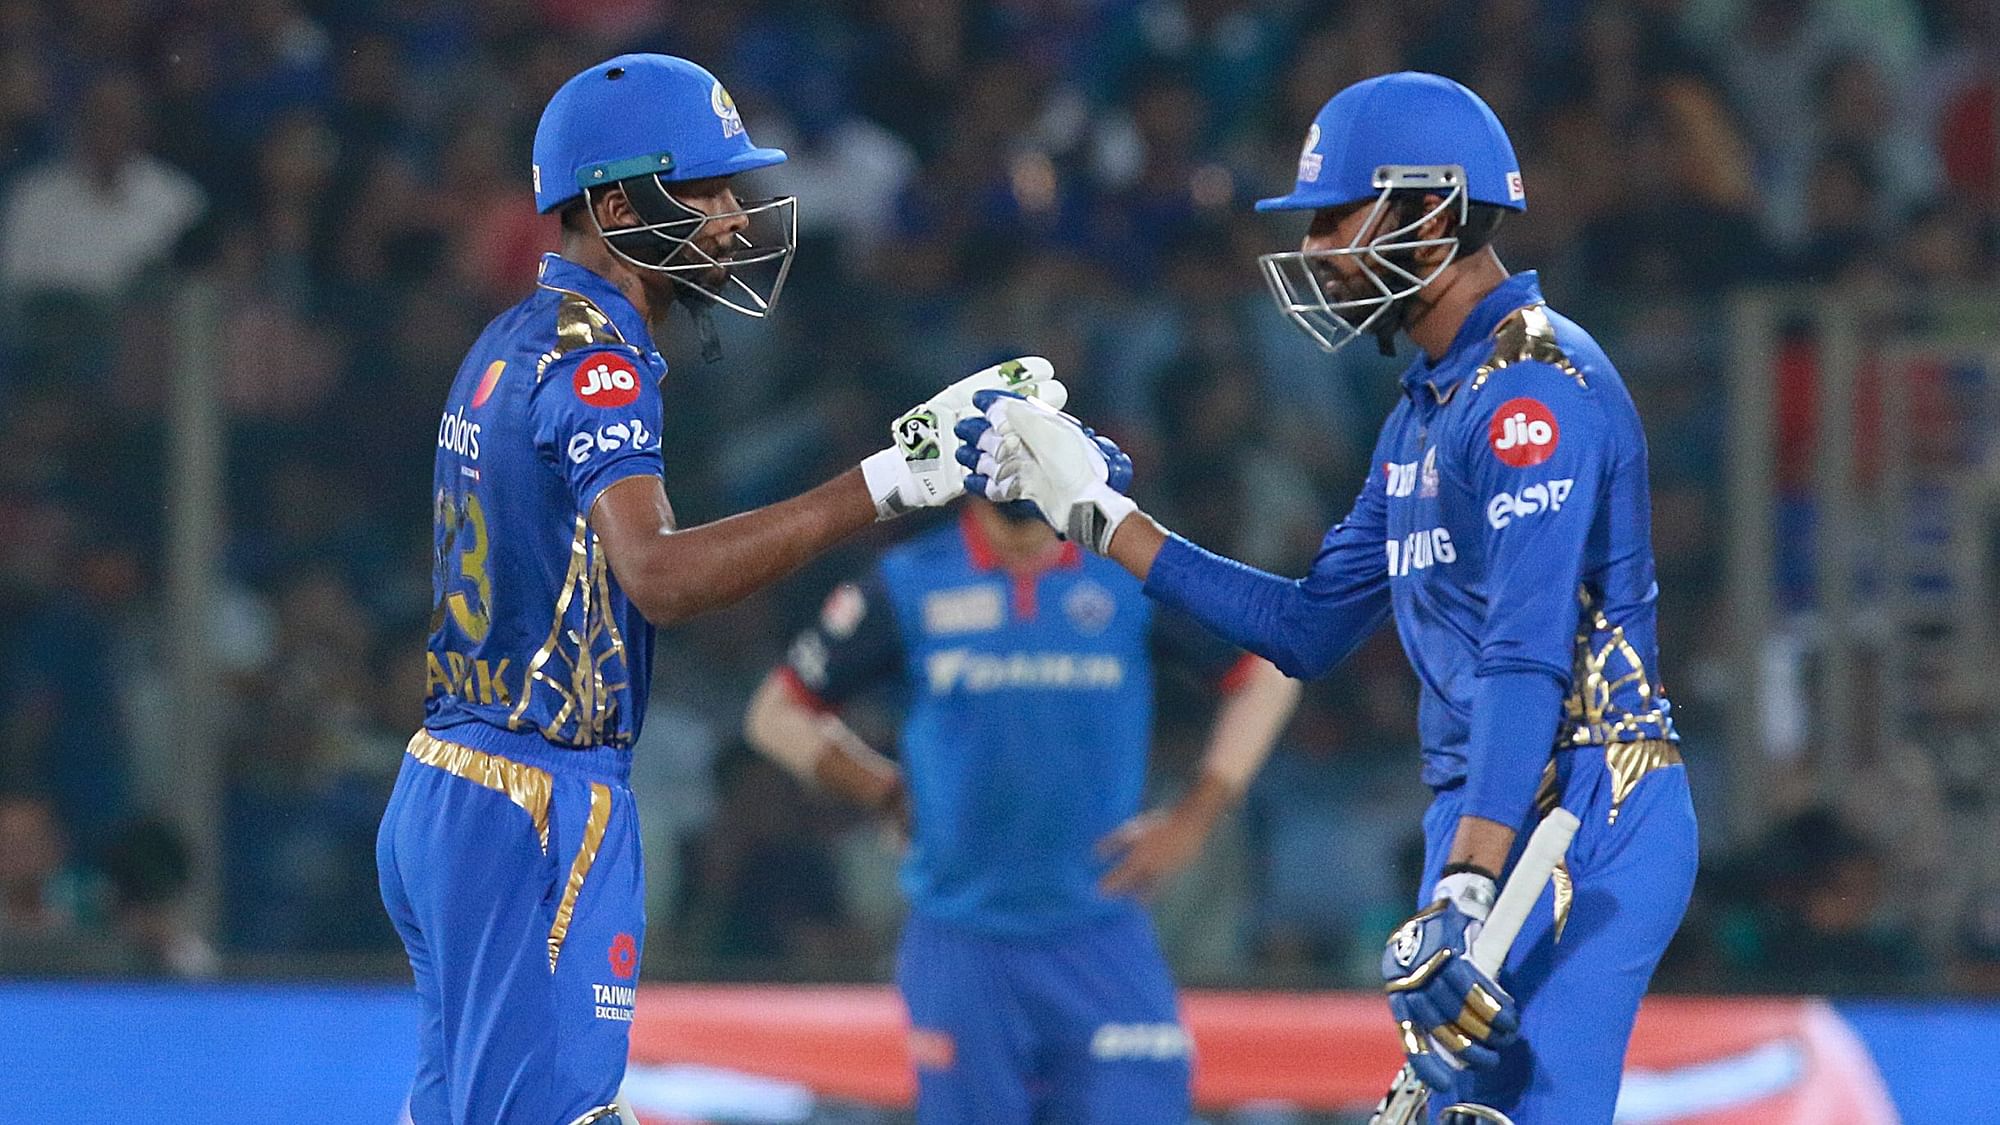 Hardik Pandya (left) and Krunal Pandya put up a stand of 54 runs for the fifth wicket.